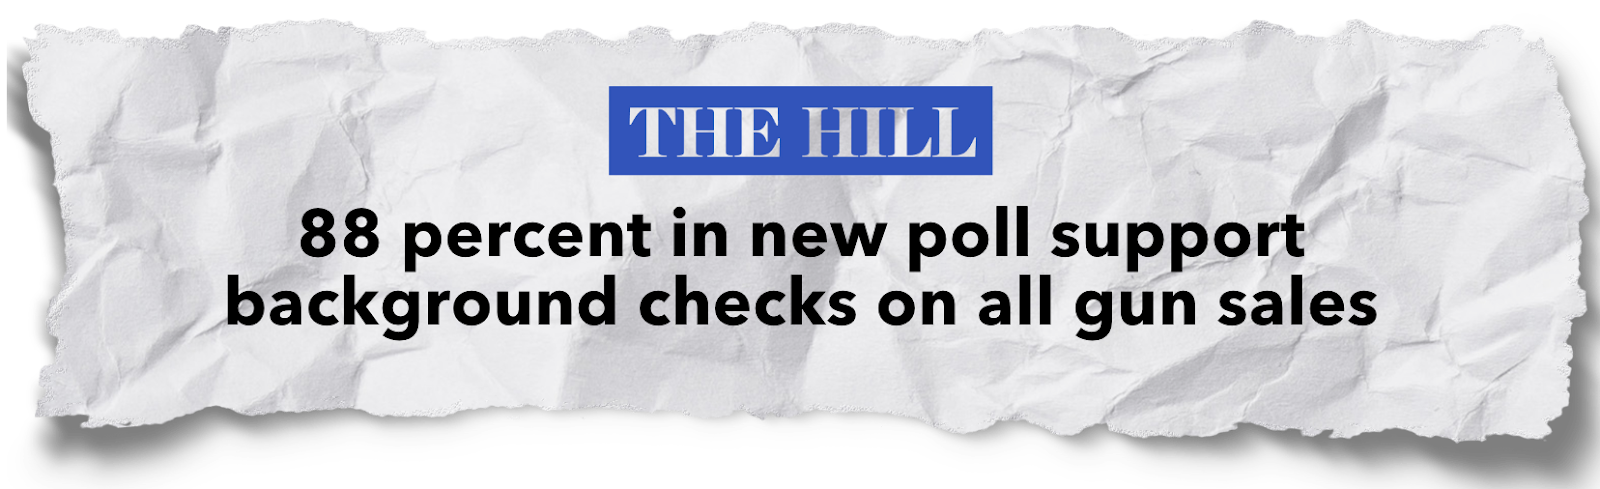 THE HILL: 88 percent in new poll support background checks on all gun sales